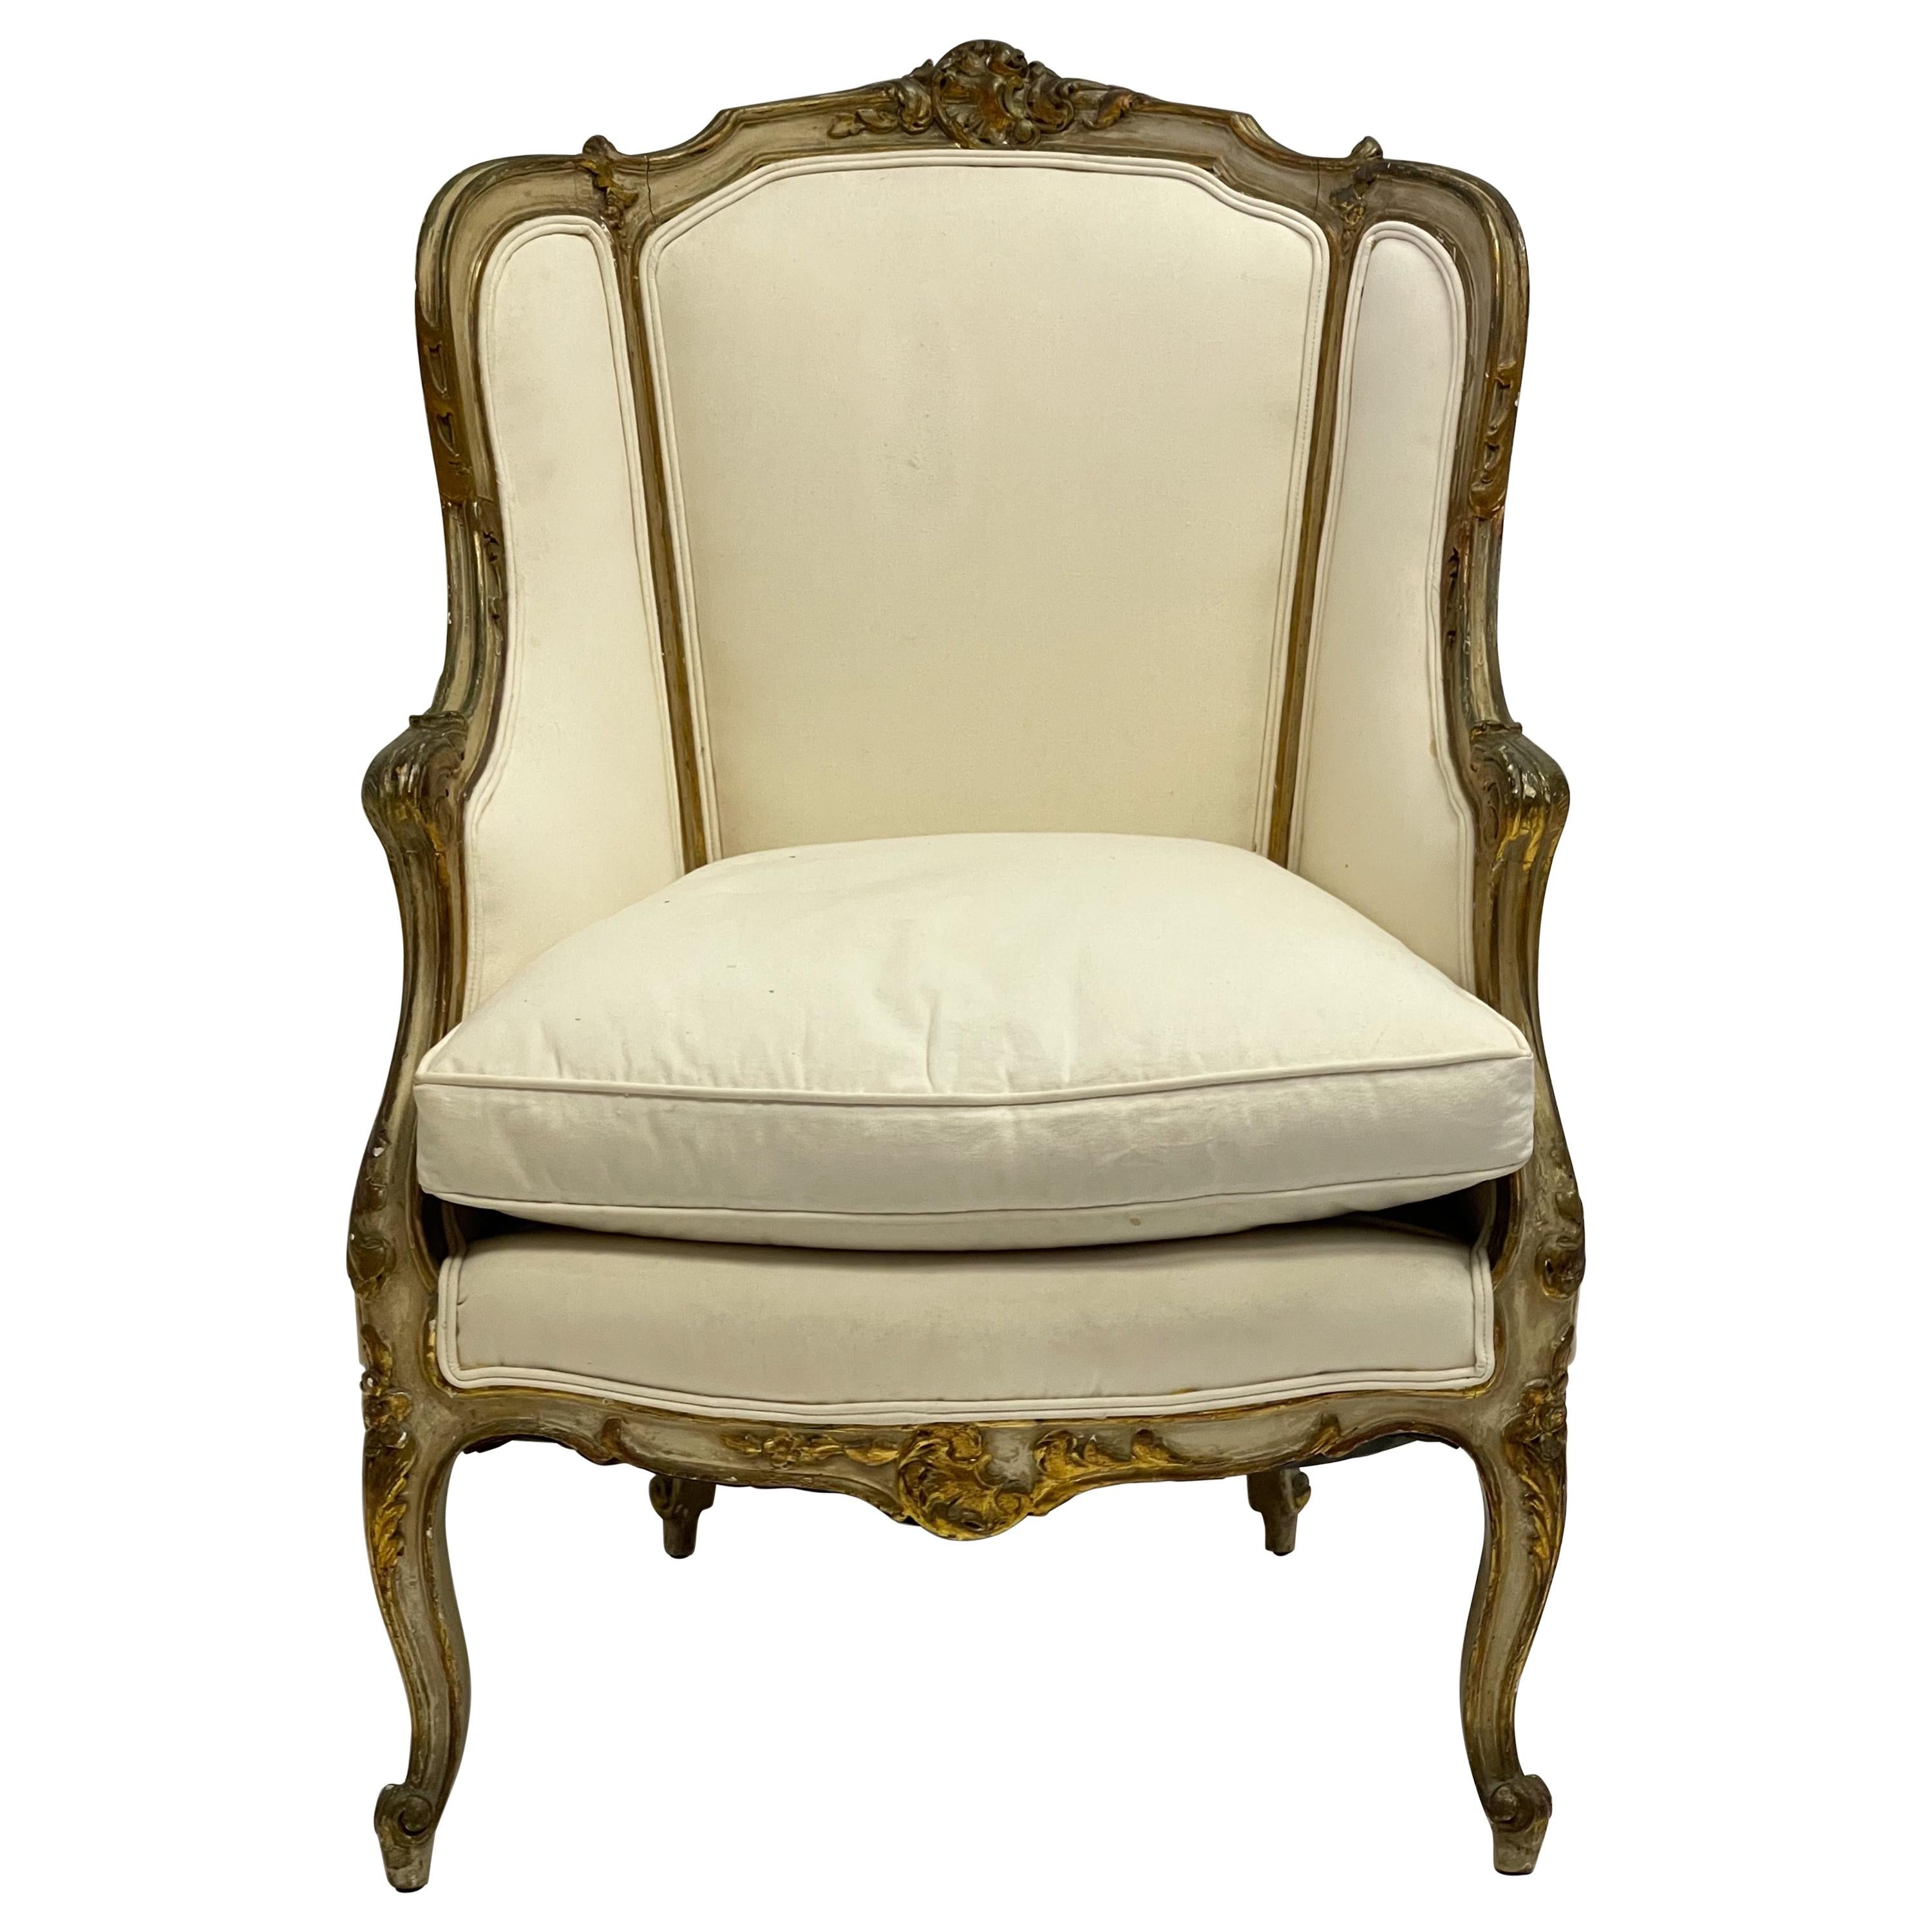 Antique French Louis XVI Style Carved Giltwood BergereChair